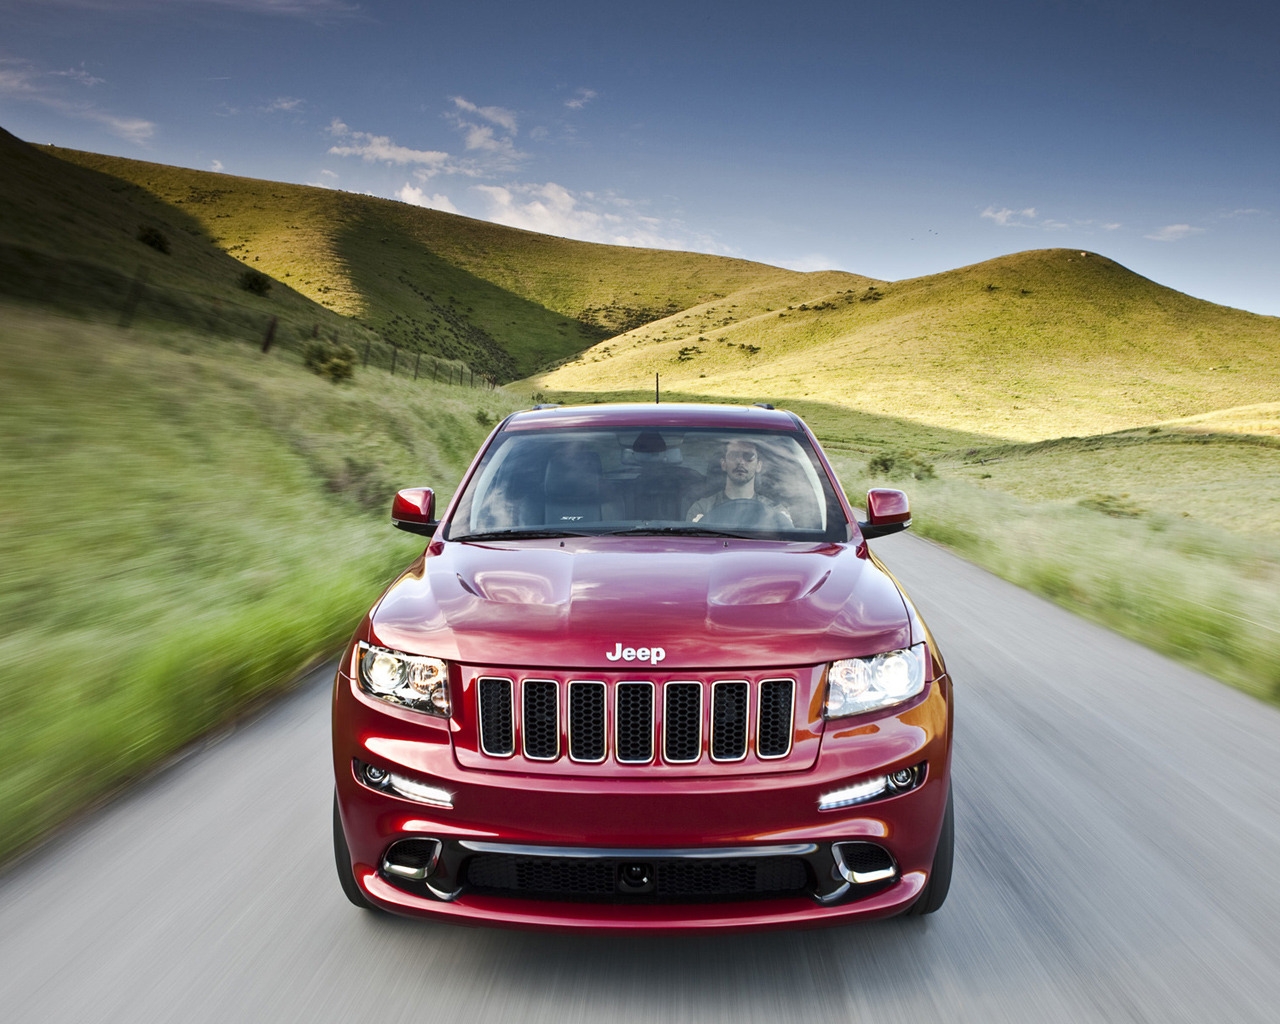 Jeep Grand Cherokee SRT8 2012 for 1280 x 1024 resolution